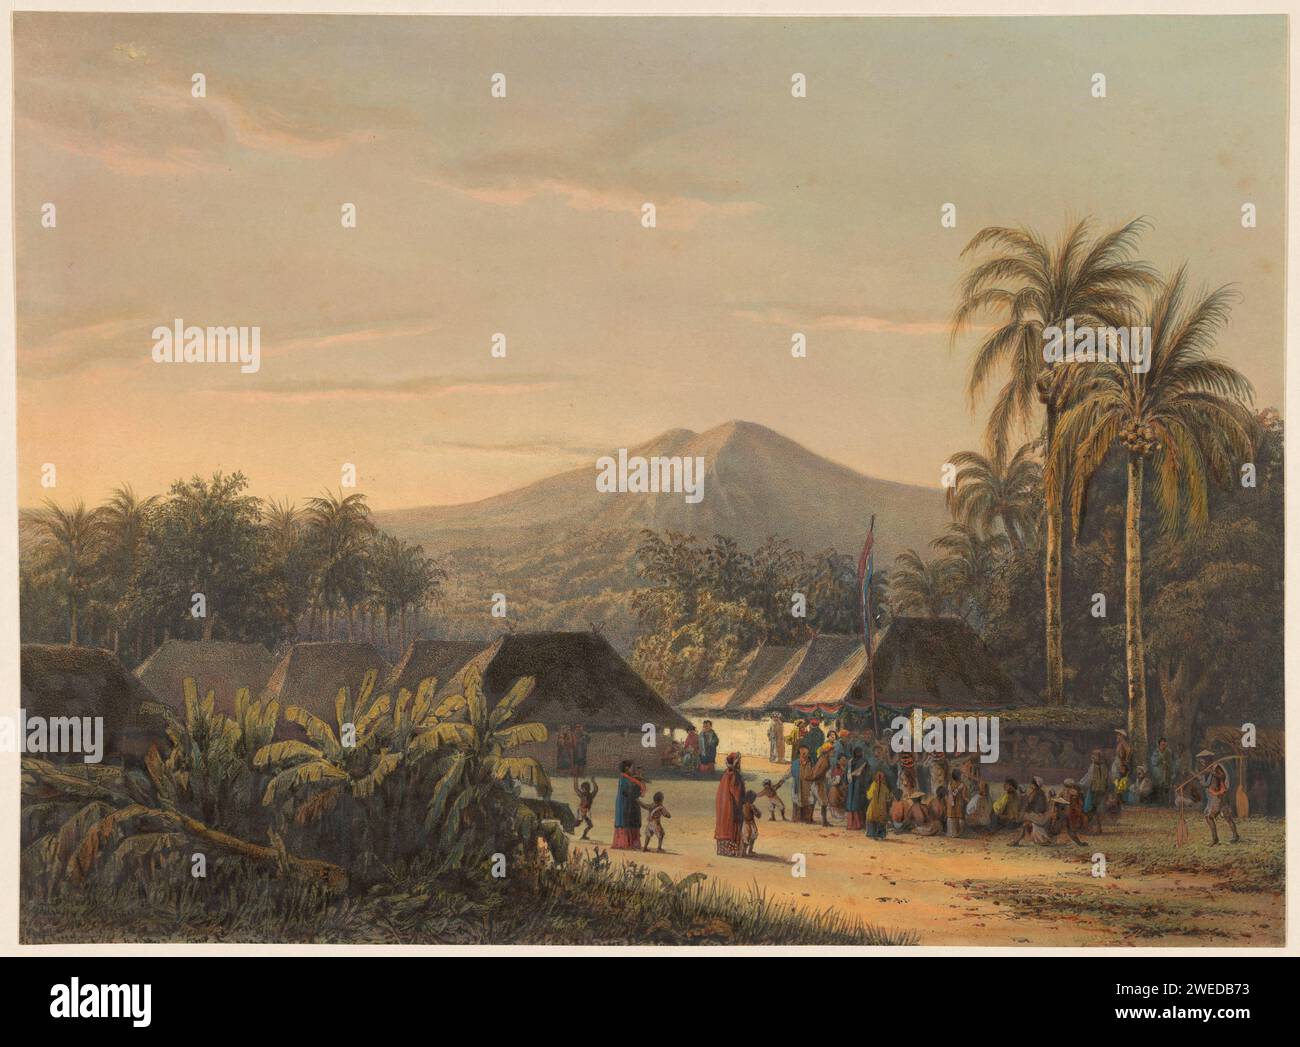 Village festival near the Berg Ardjoeno, Johan Conrad Greive, after Abraham Salm, 1869 print The villagers have gathered at a Dutch flag. The print is part of a cover with a text sheet and 24 individual prints. print maker: Amsterdamafter design by: Dutch East Indies, Thepublisher: Amsterdam paper  landscapes in tropical and sub-tropical regions. public festivities Java Stock Photo